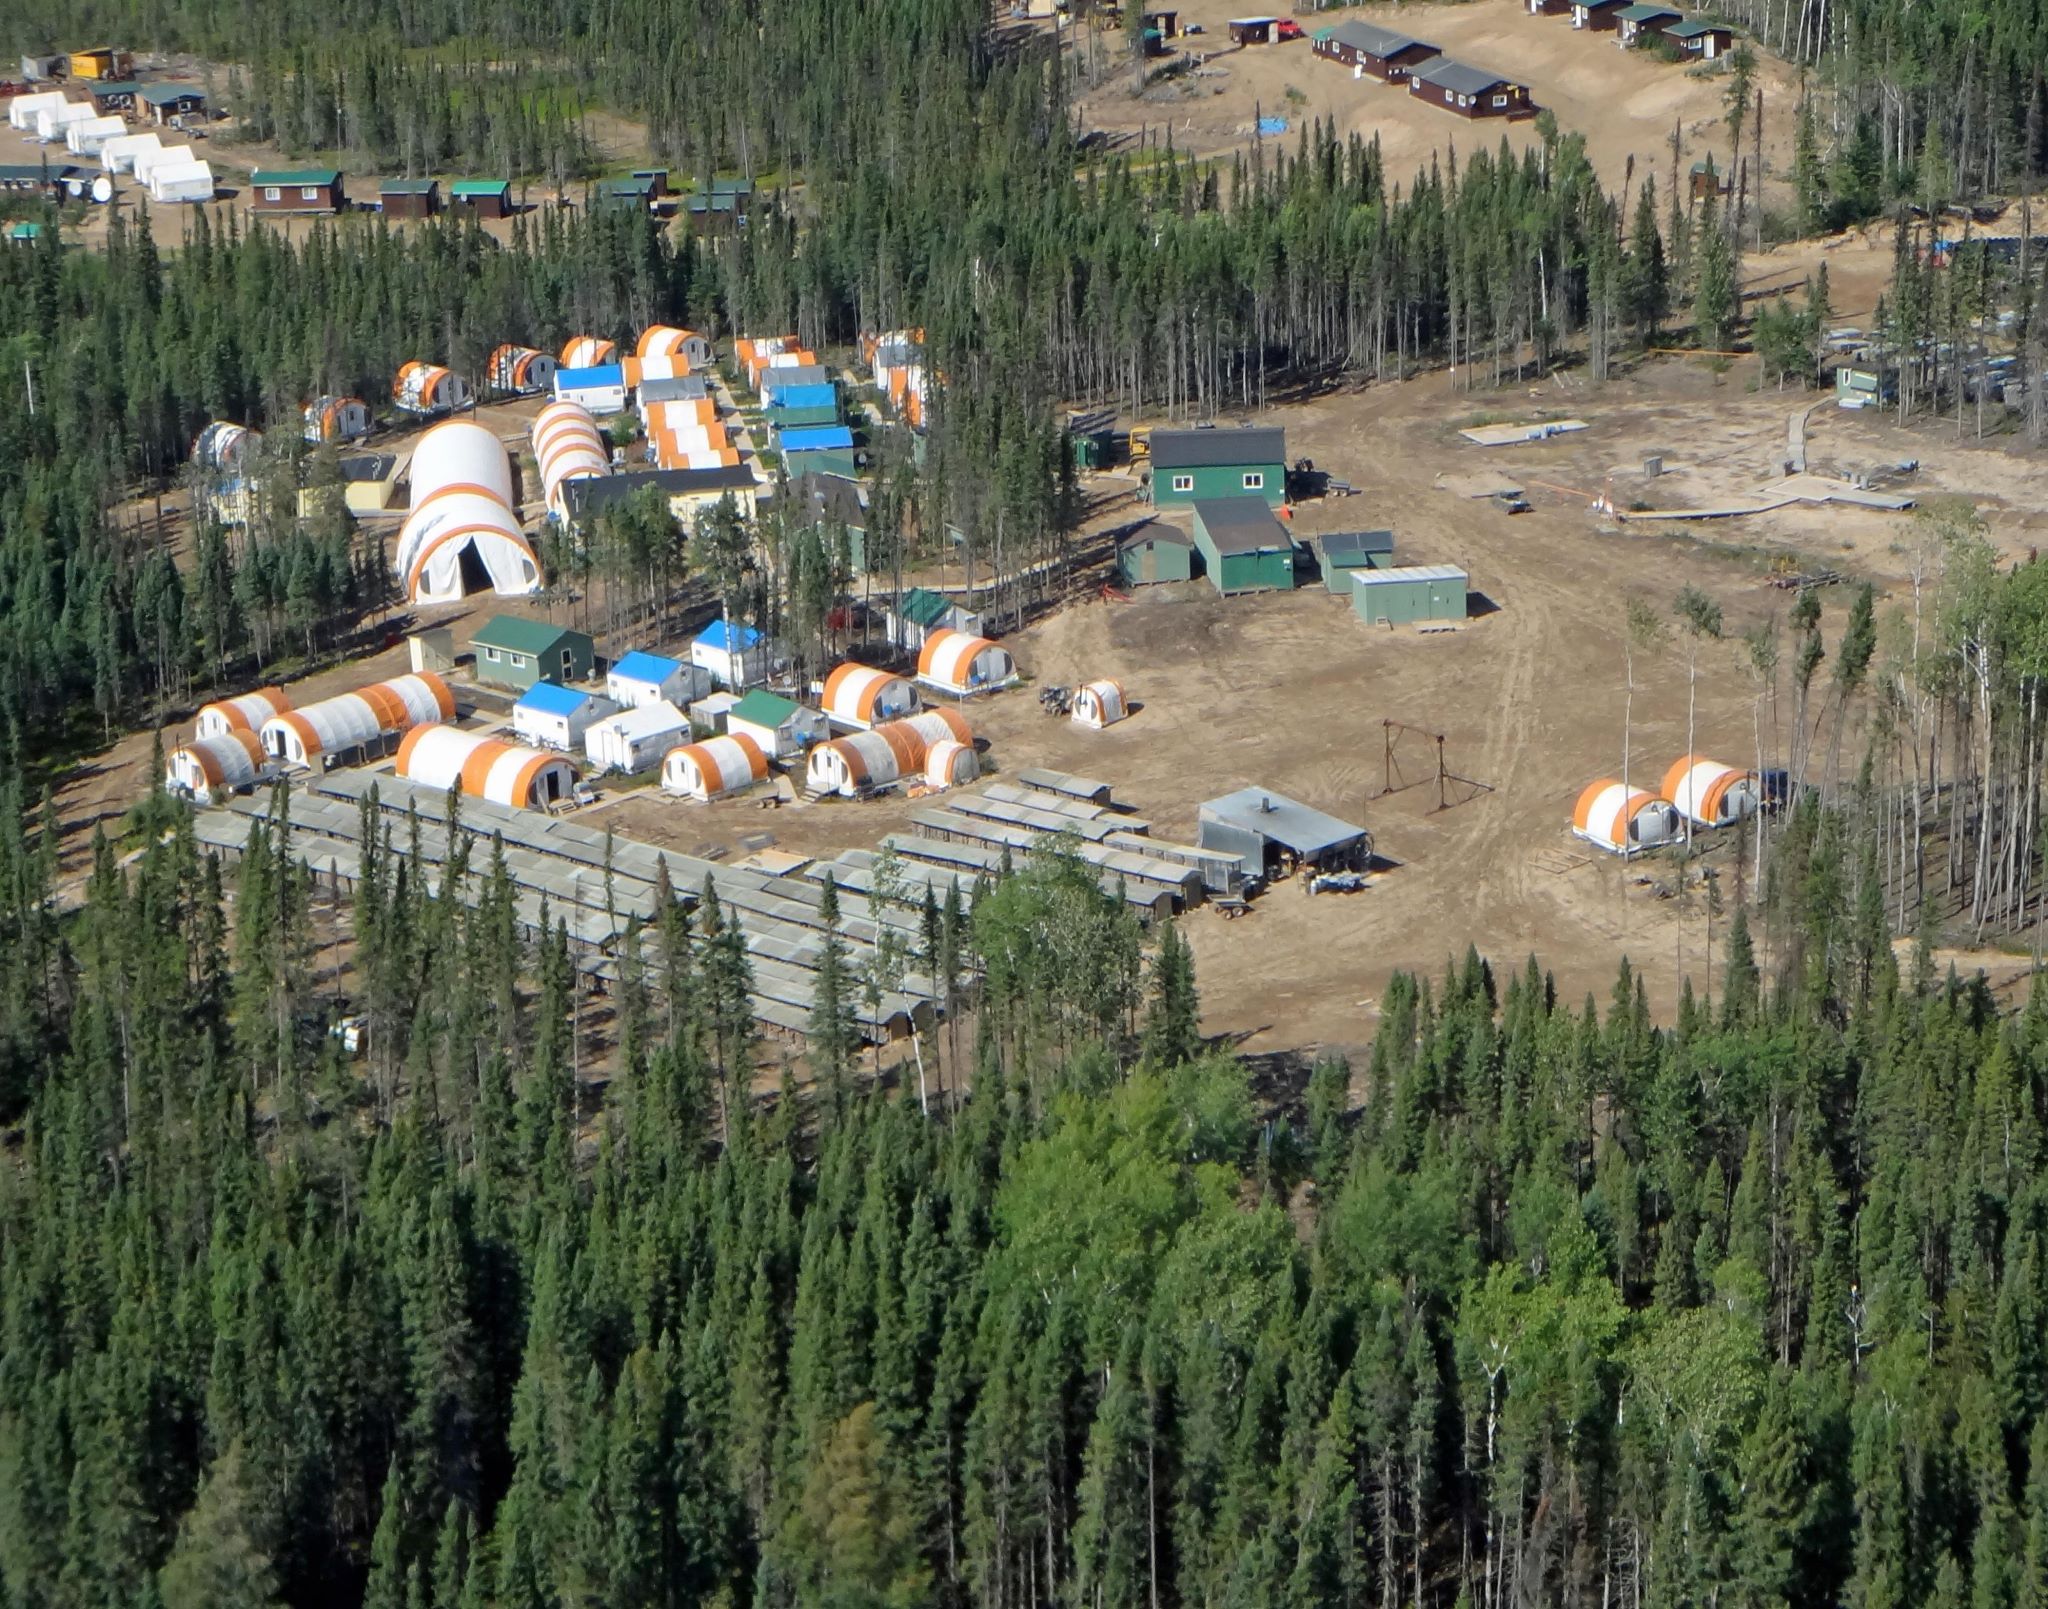 An aerial view of Noront Resources' Esker camp in Ontario's Ring of Fire. The camp is seen in a clearing in the forest, with buildings and tents with rounded roofs.